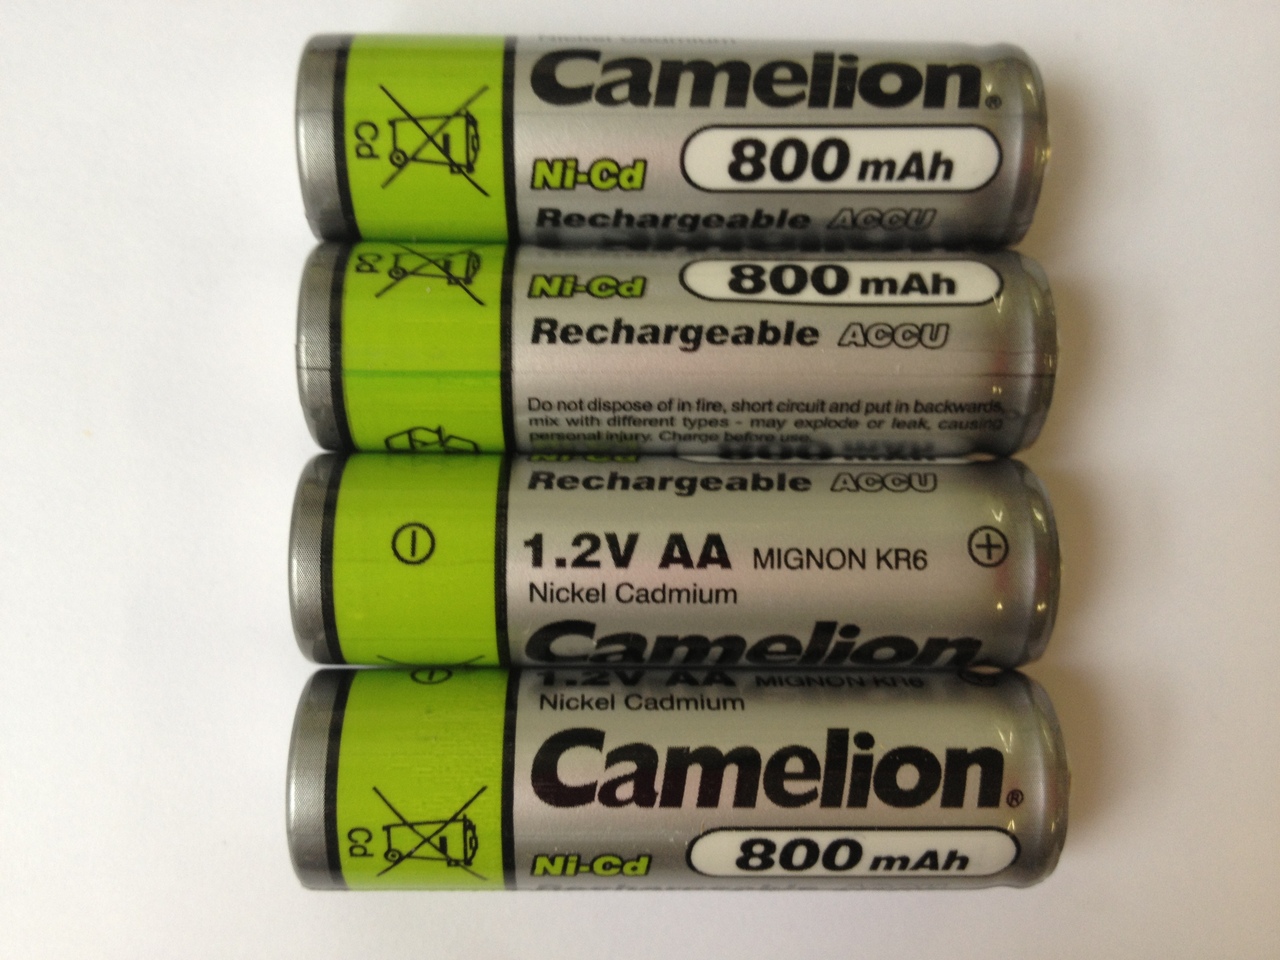 Camelion AA Rechargeable NiCD Batteries 800mAH 8 Pack + FREE SHIPPING!